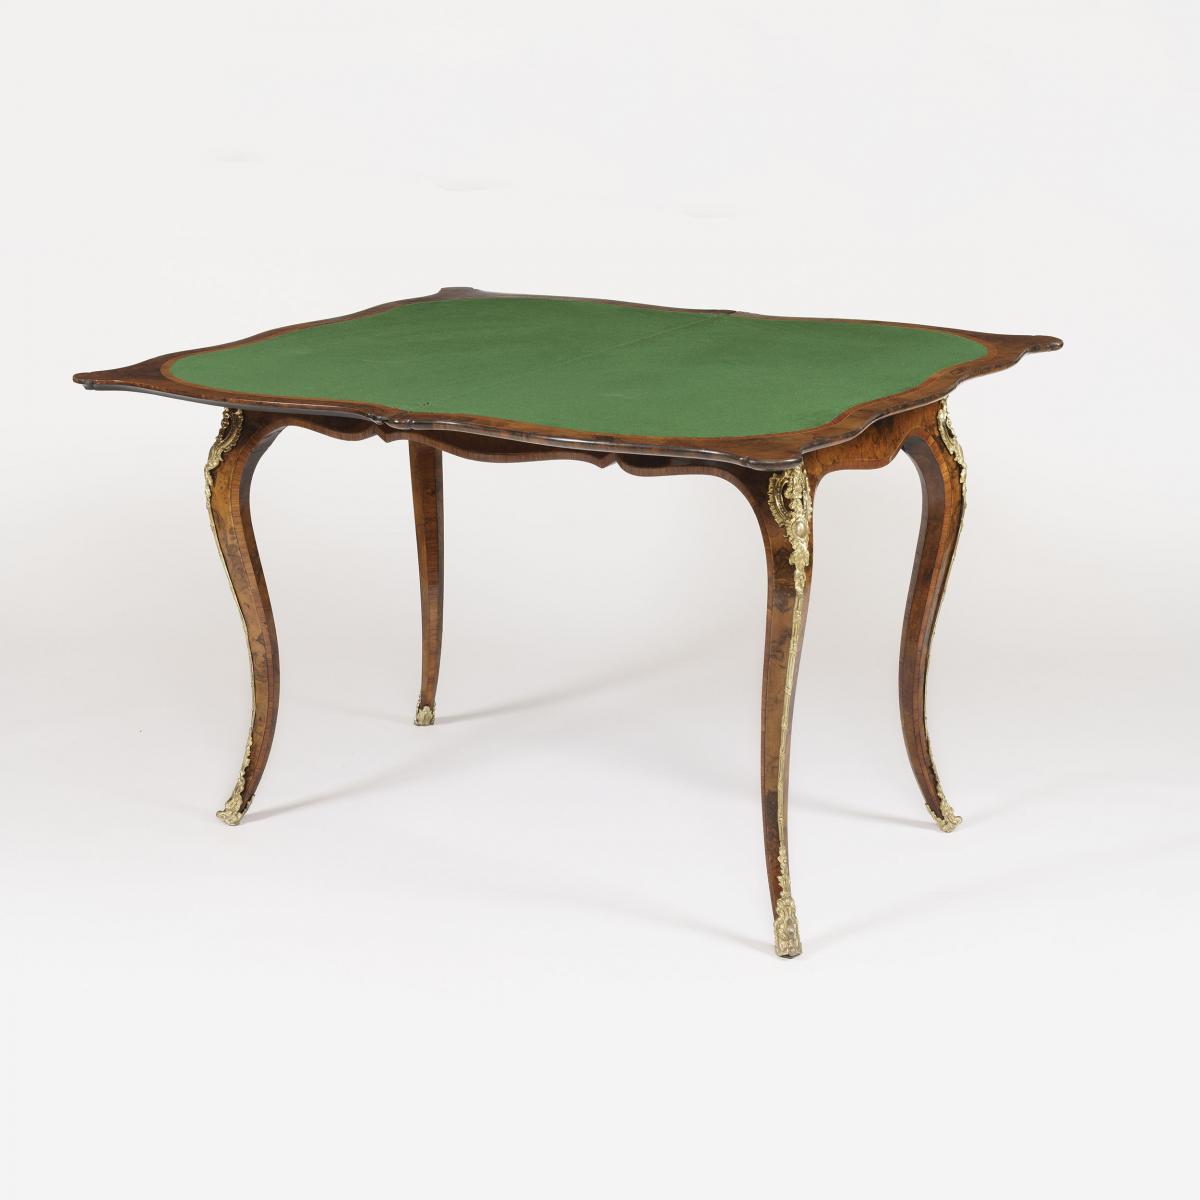 A Walnut Serpentine Card Table Firmly Attributed to Gillows